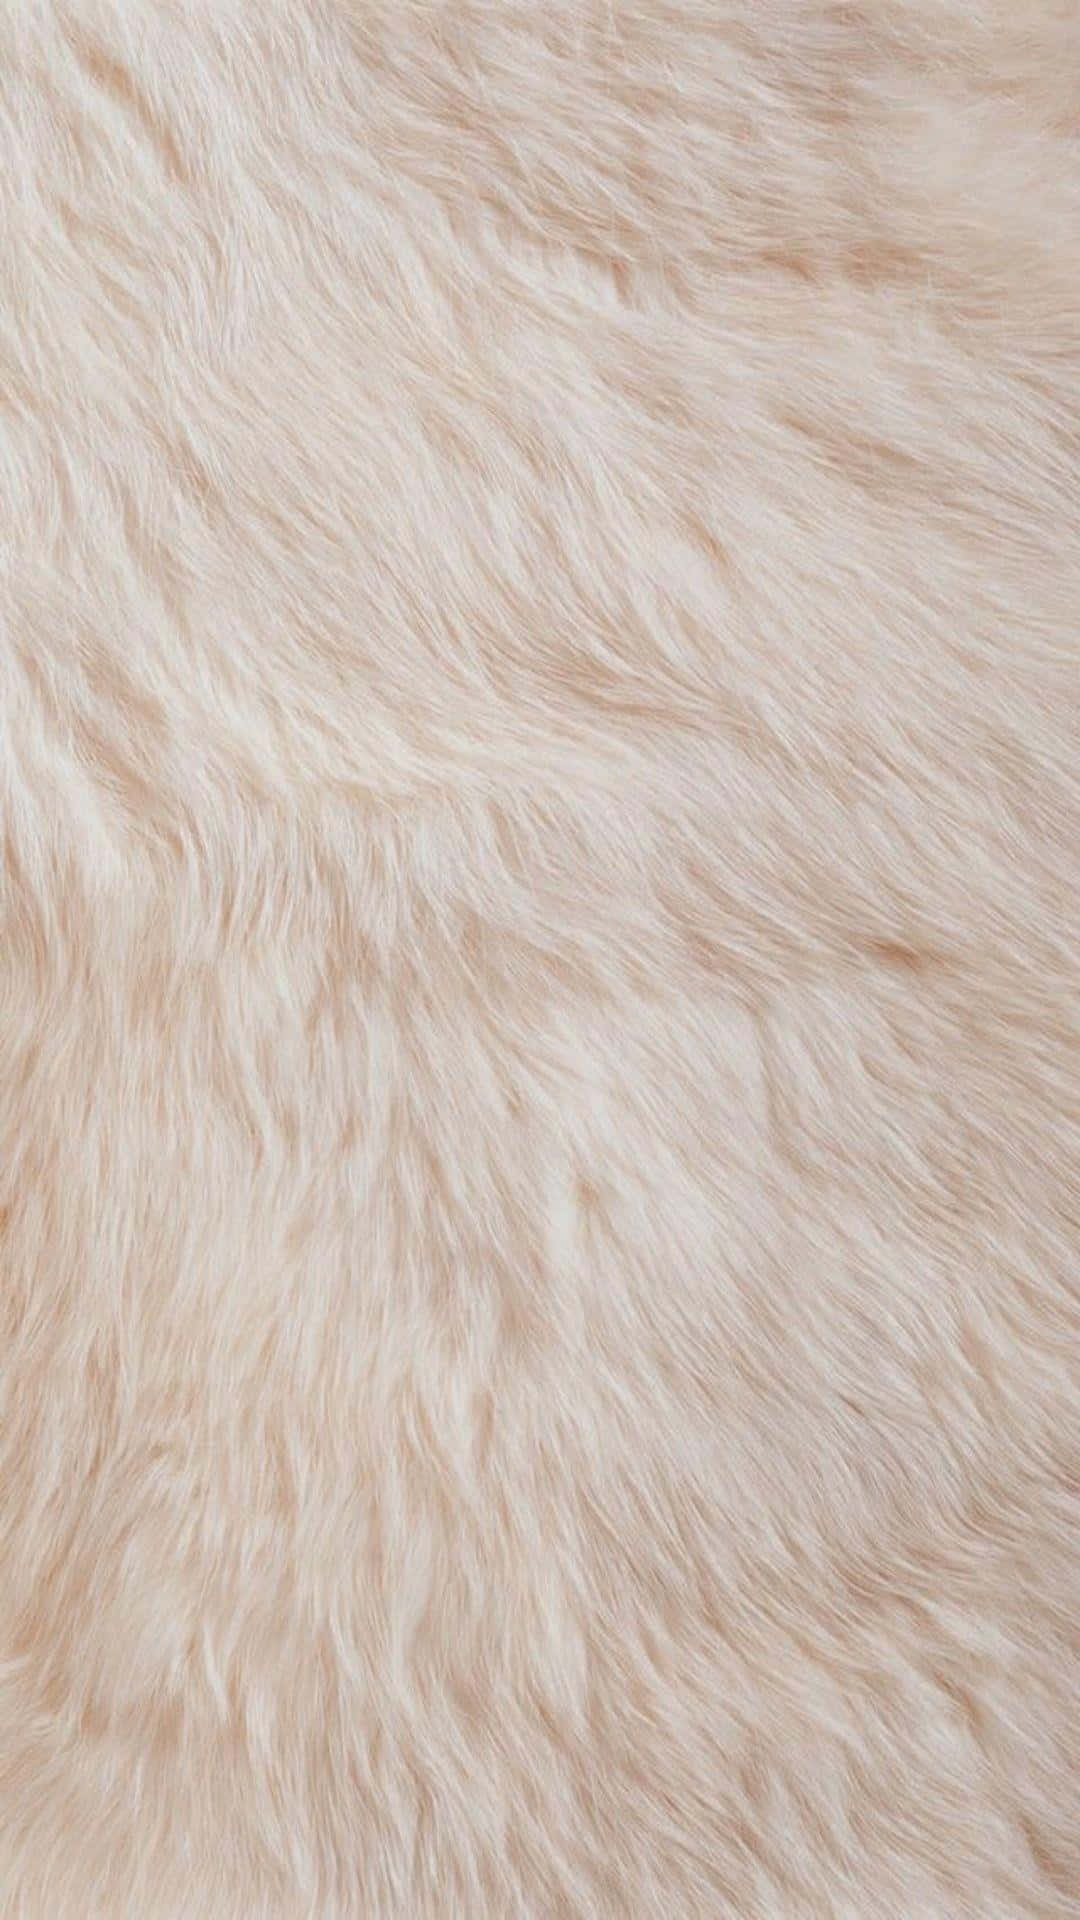 Download Fuzzy Off-white Fur Wallpaper | Wallpapers.com